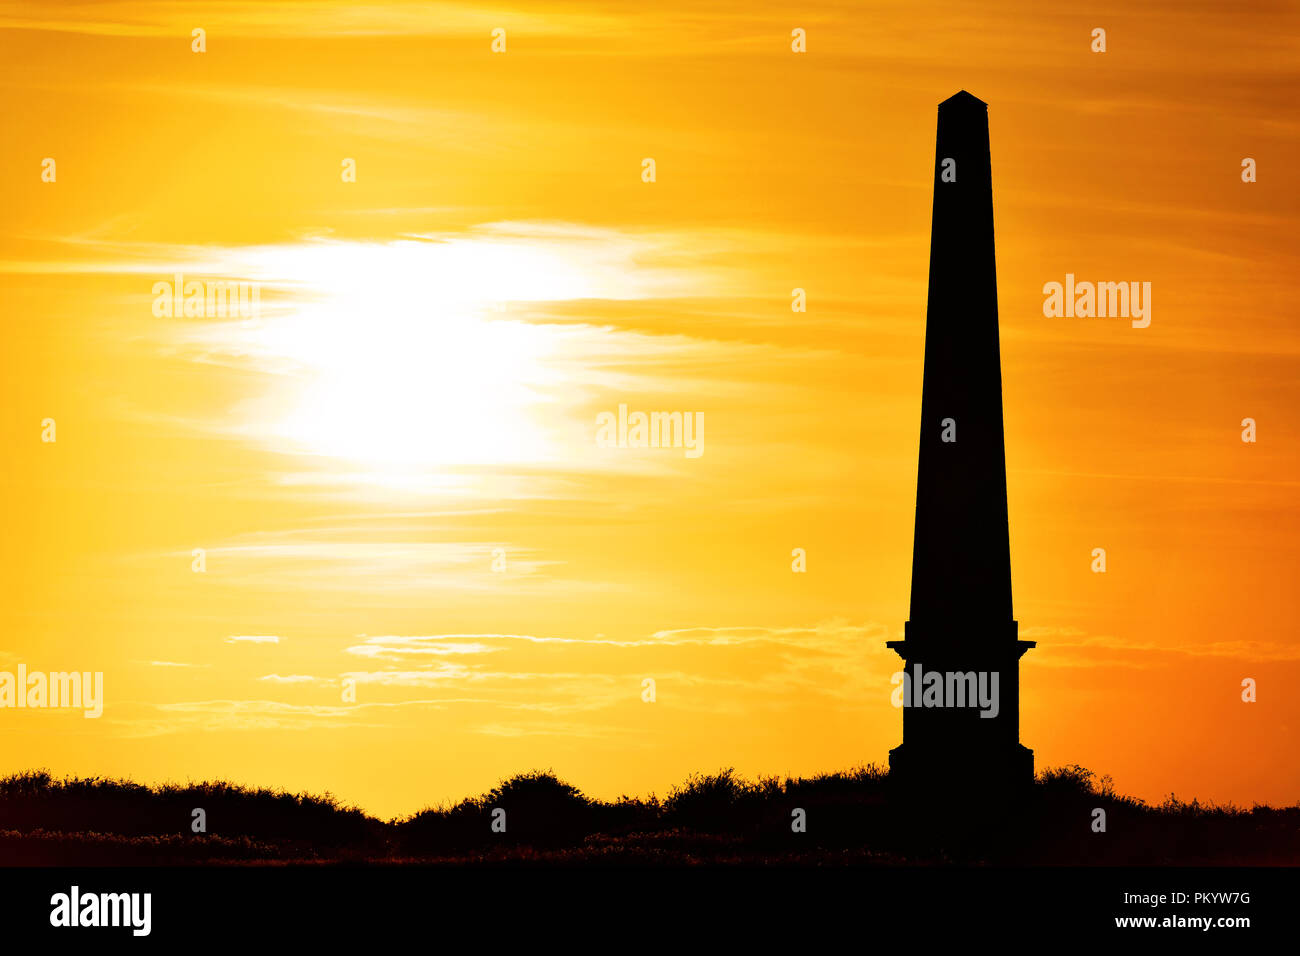 Seaton Deleval Hall obelisk in corn fields at sunset Stock Photo